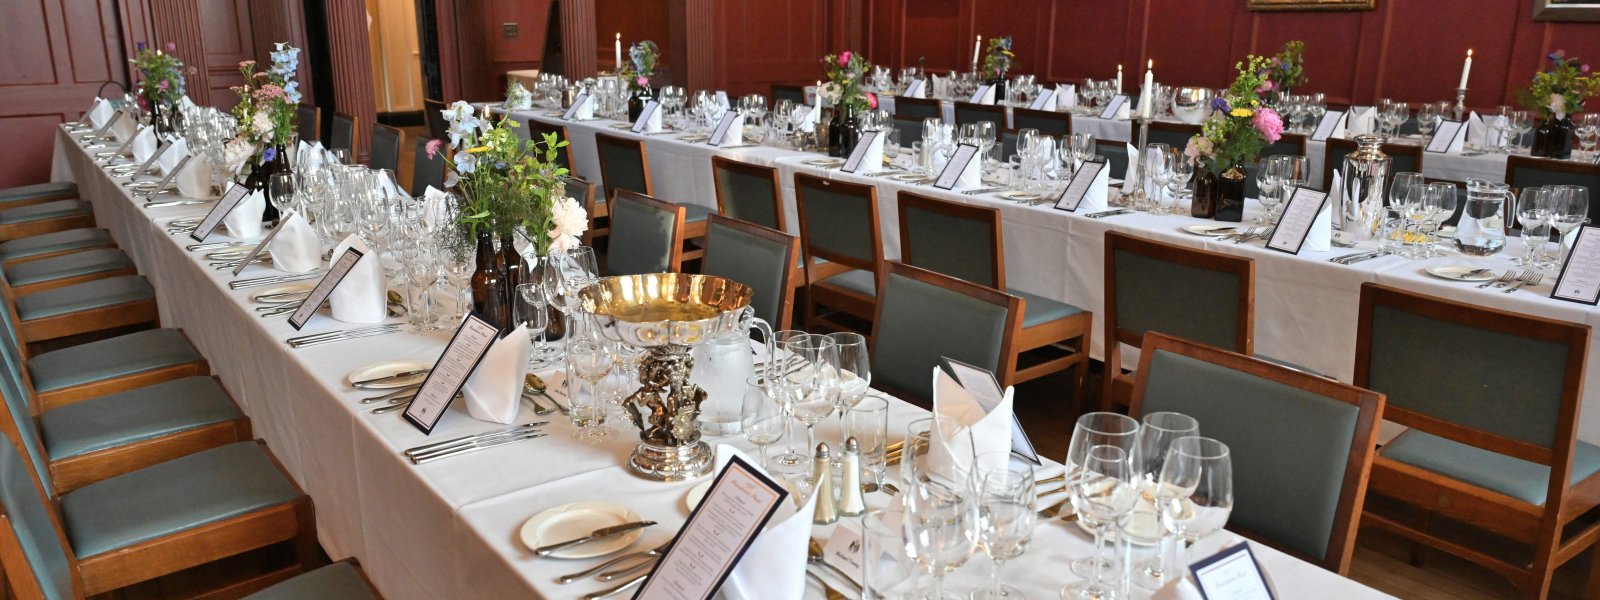 Image of dining hall at Sidney Sussex College